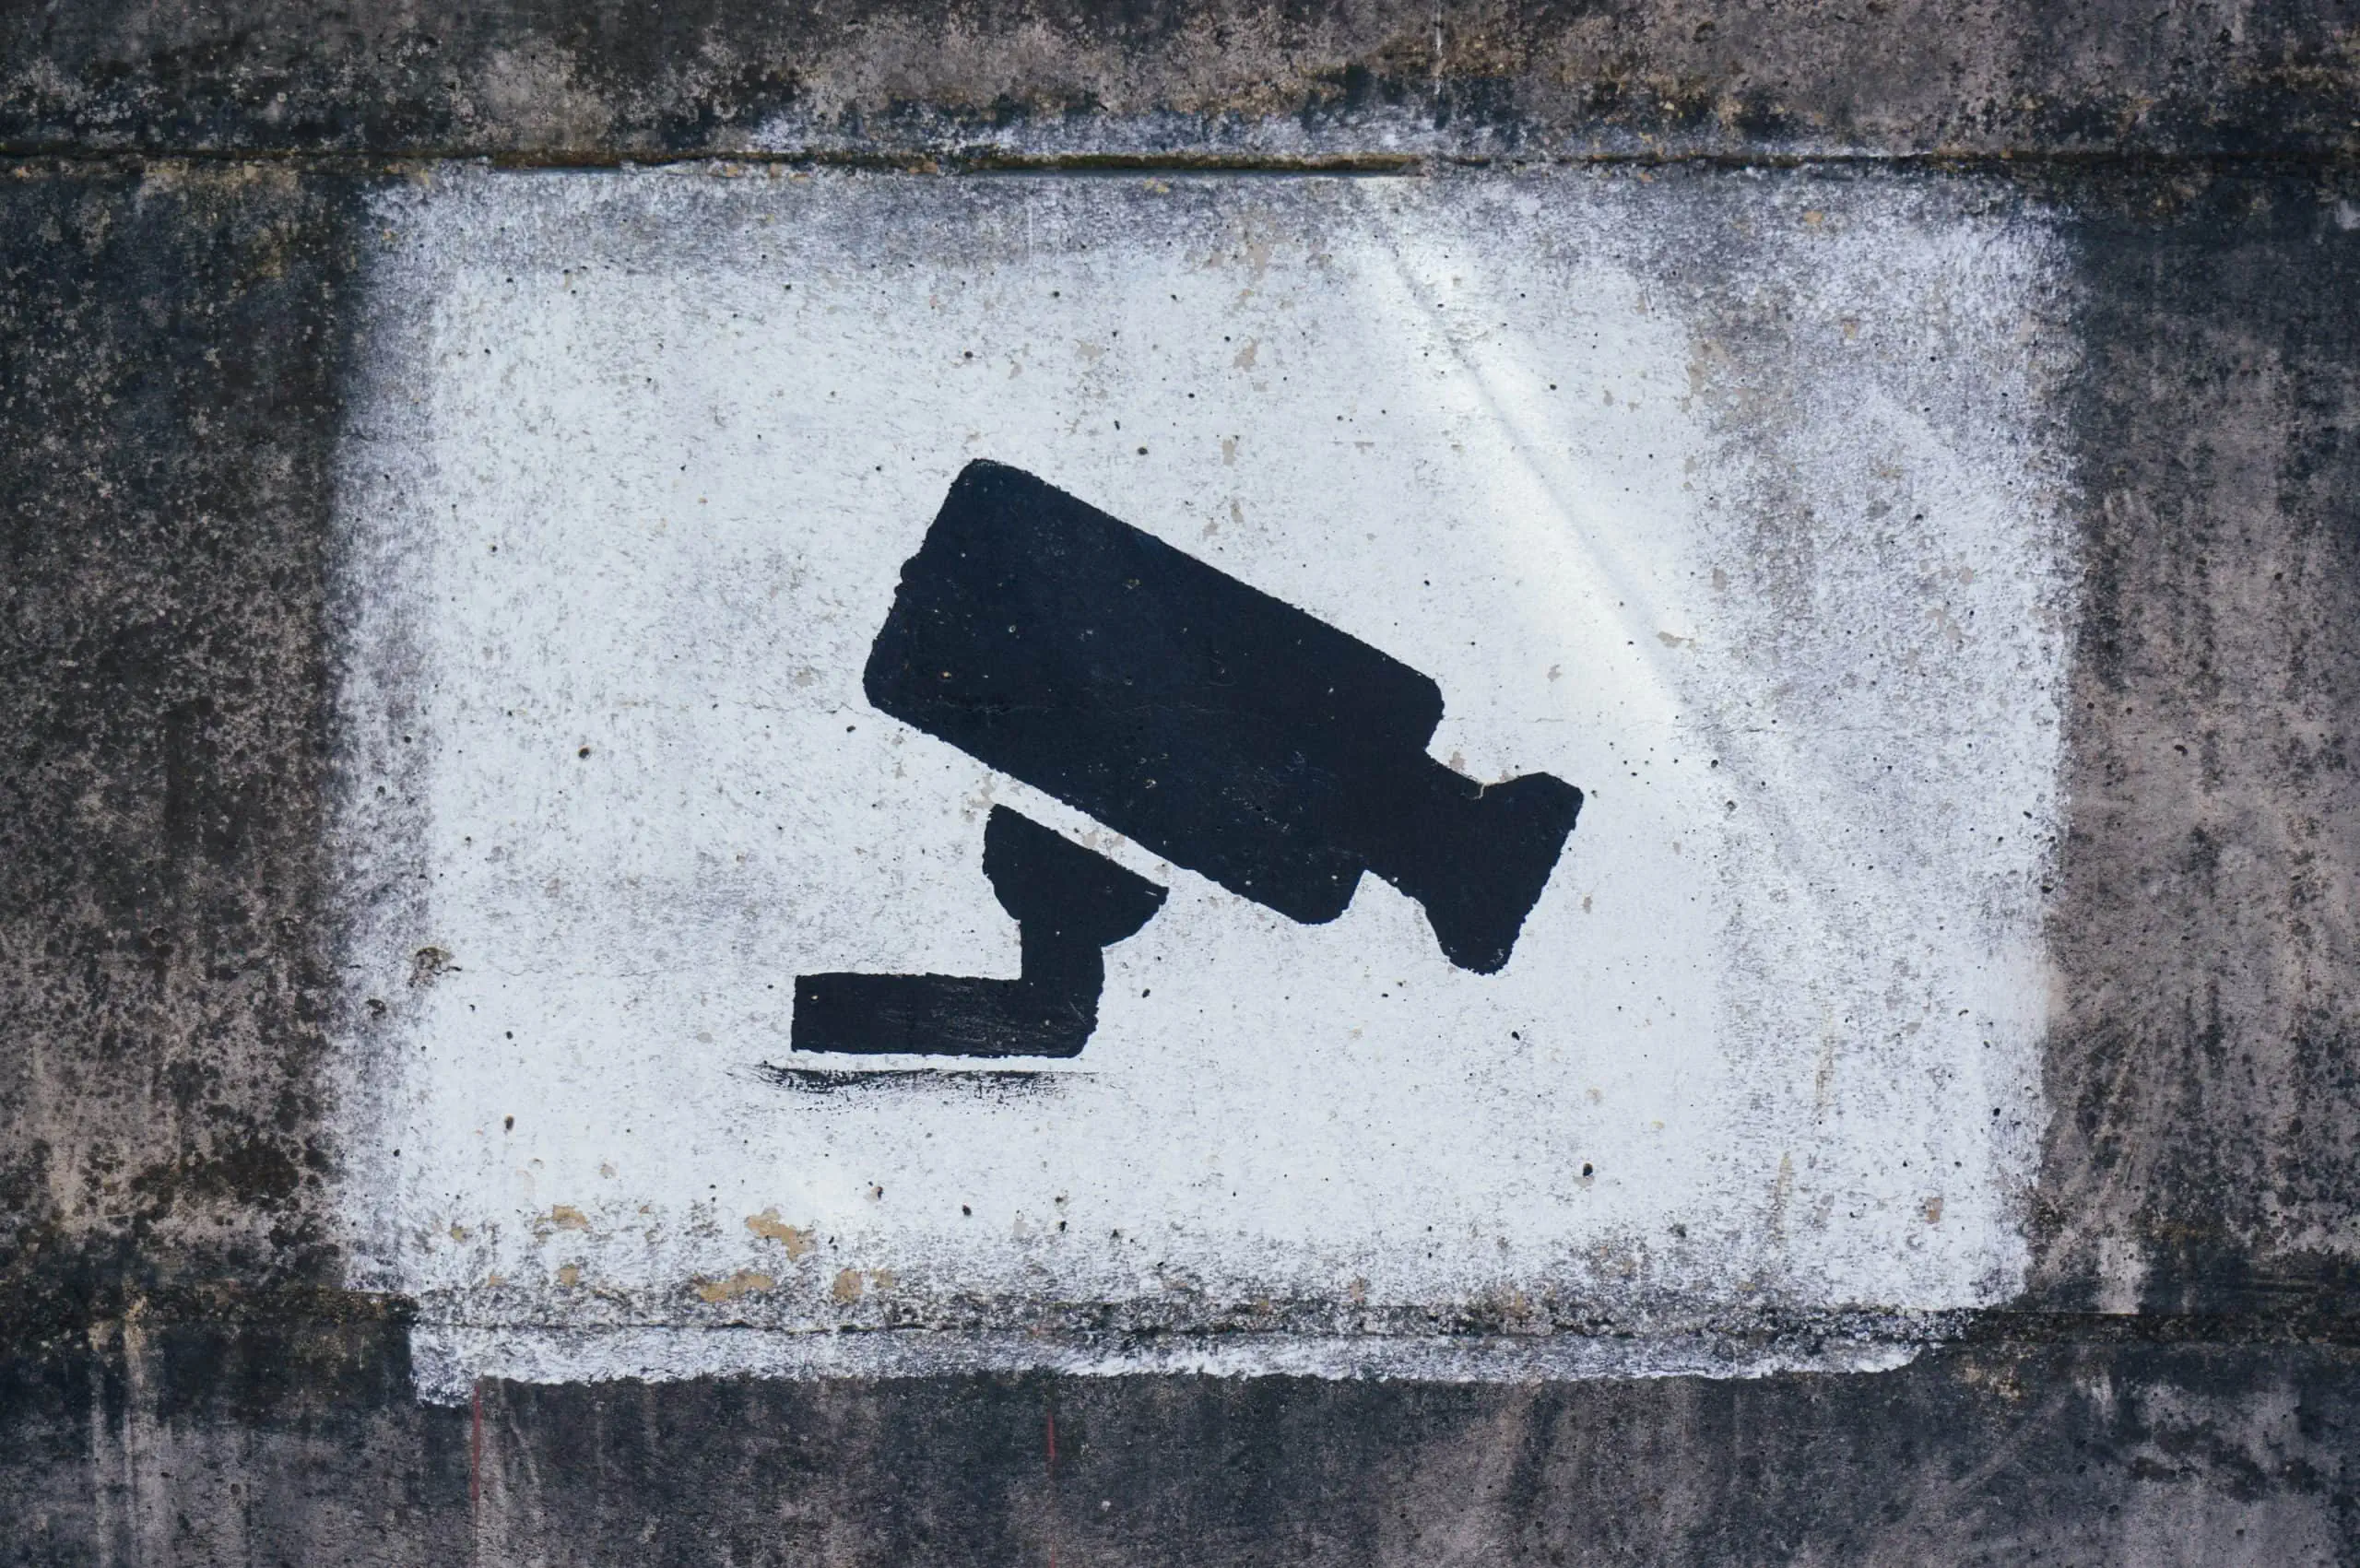 Sign indicating security camera on remote location